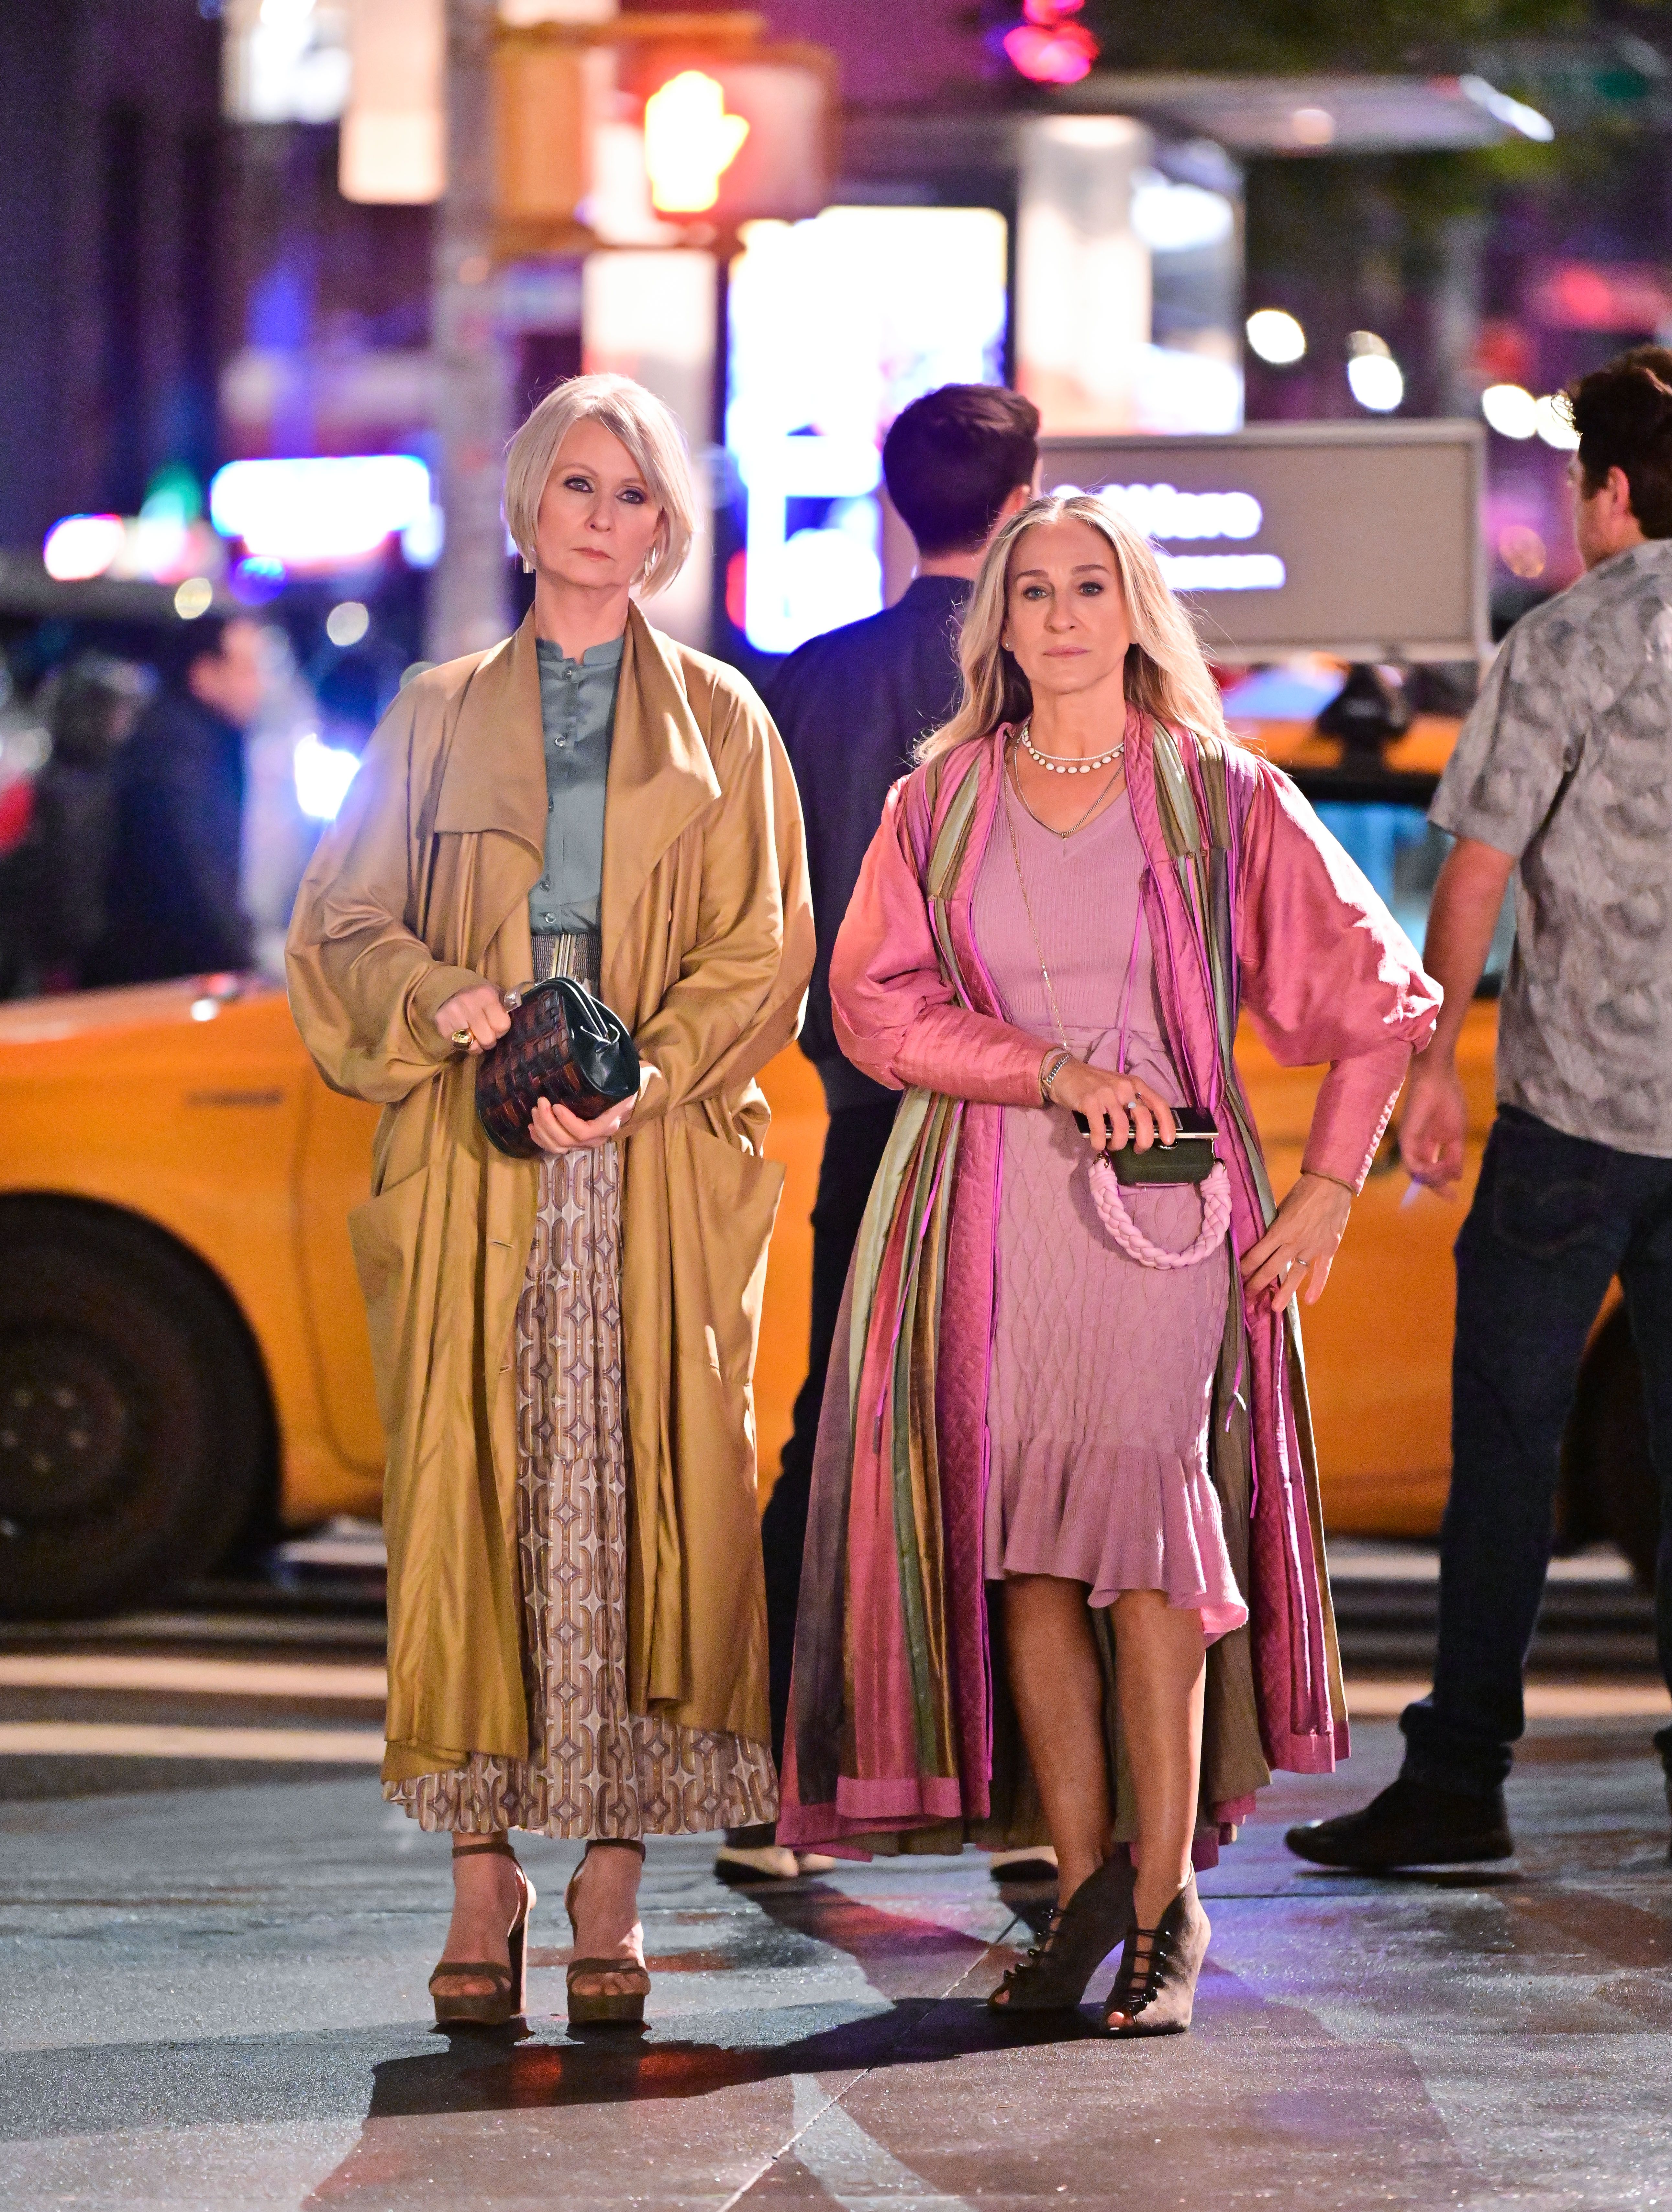 And Just Like That': See the Season 2 Fashion of Carrie, Miranda